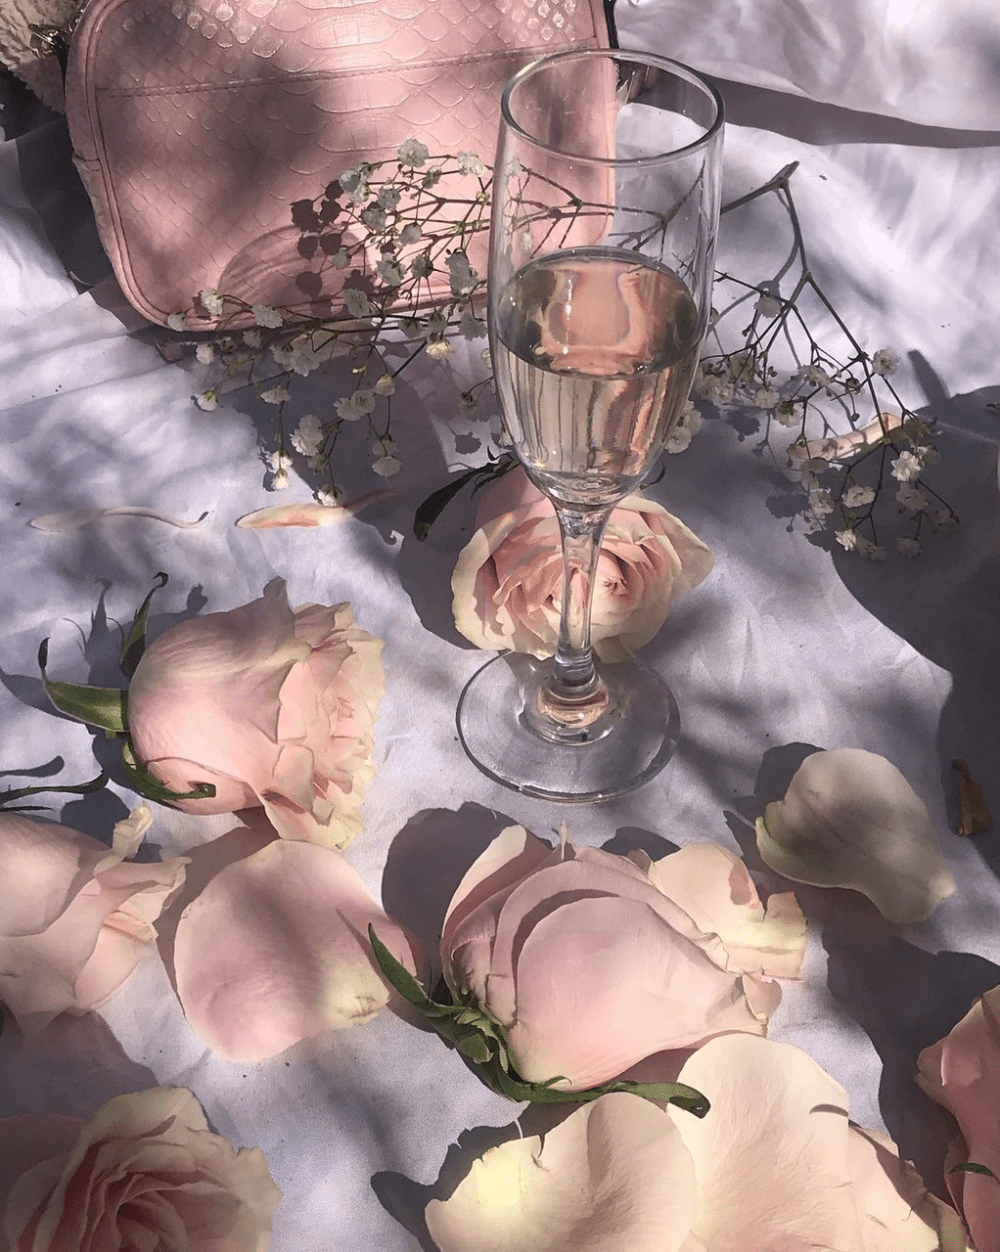 A glass of champagne sits on a table with pink roses and petals. - Champagne